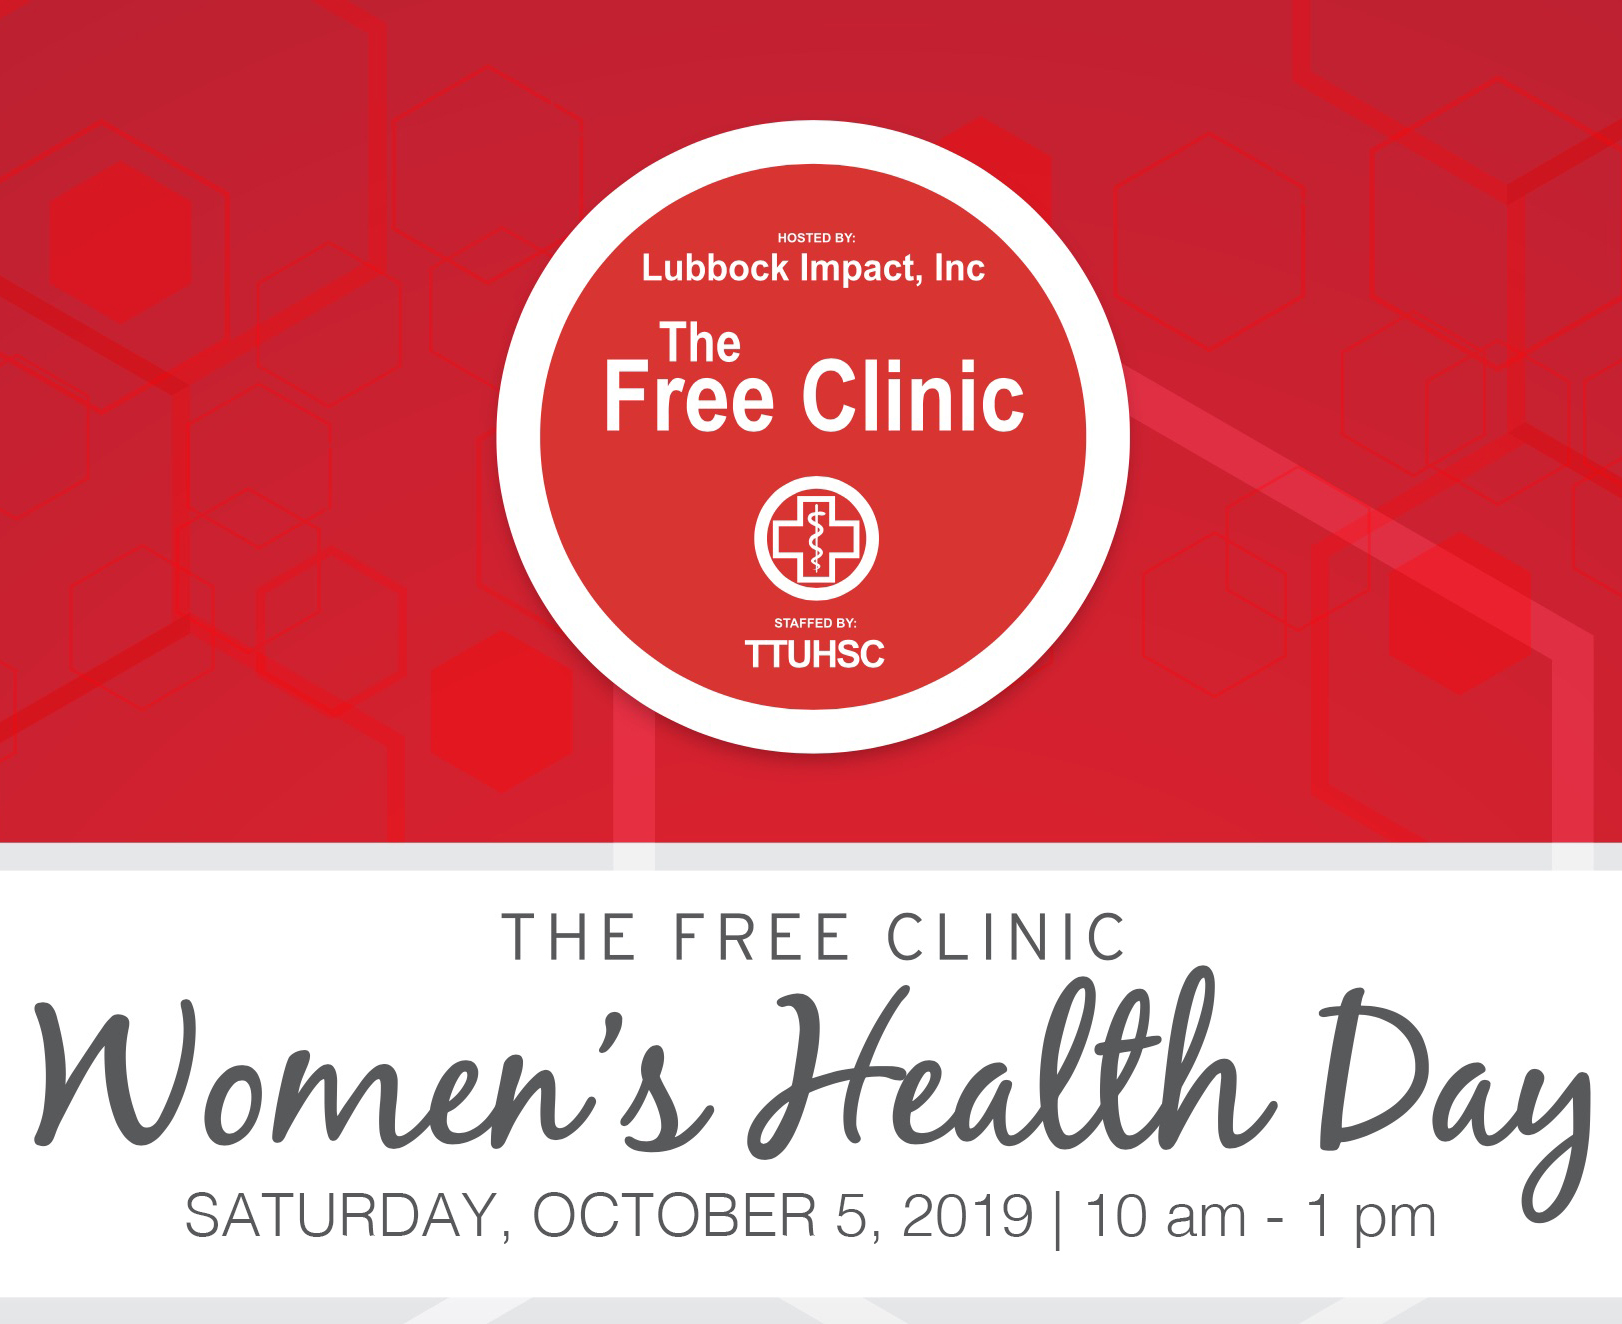 The Free Clinic Offered for Women’s Health Day